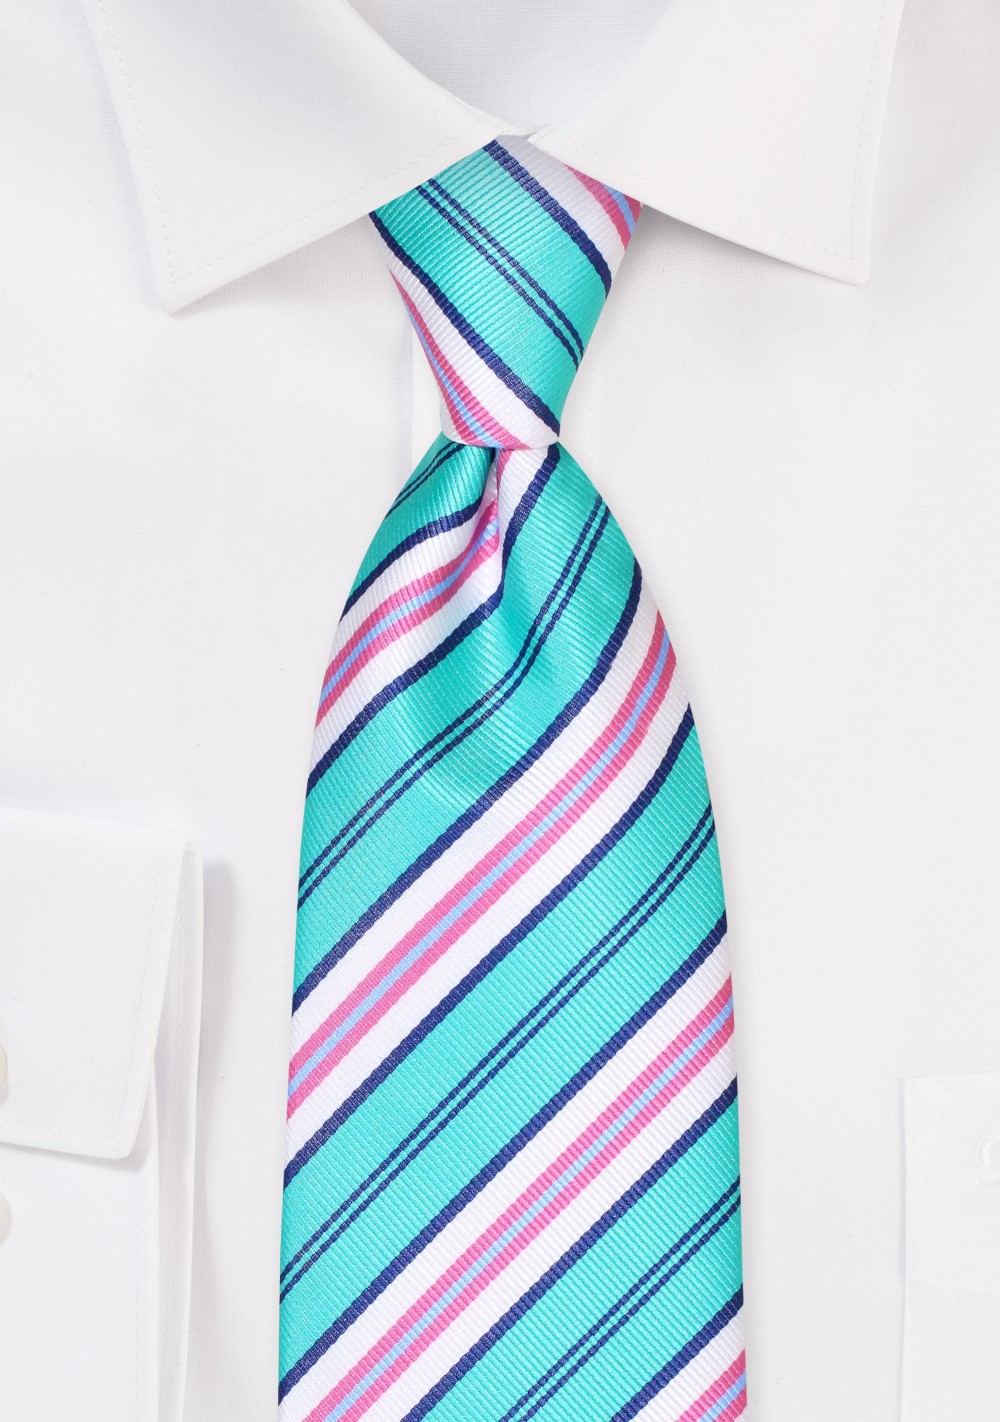 Kids Repp Tie in Green and Pink